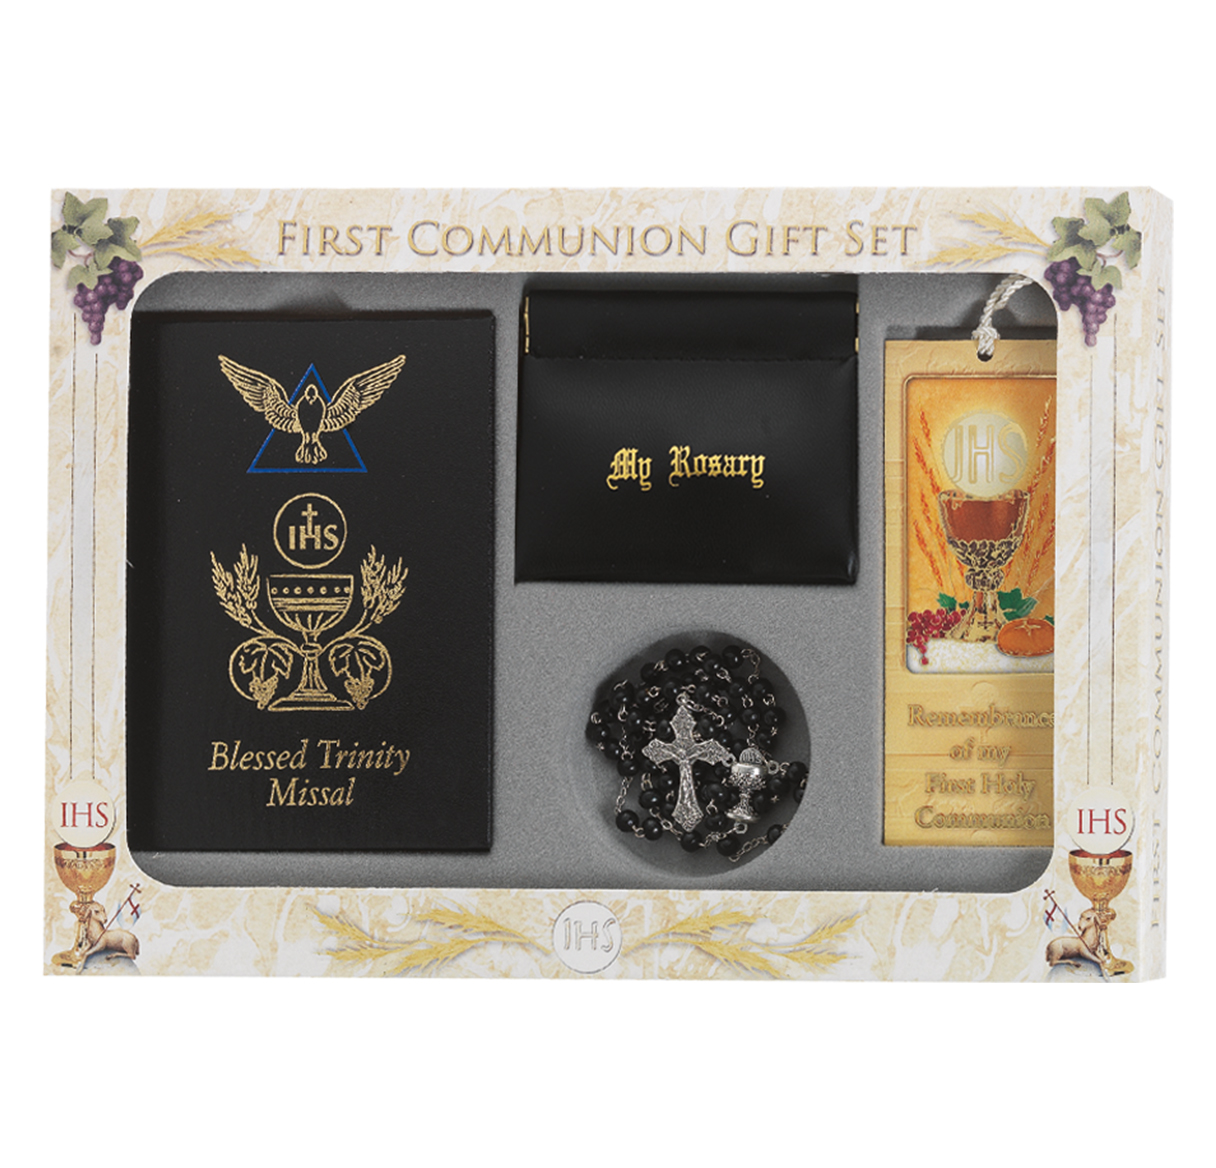 First Communion Gift Set 6pc Boys Black Blessed Trinity Missal